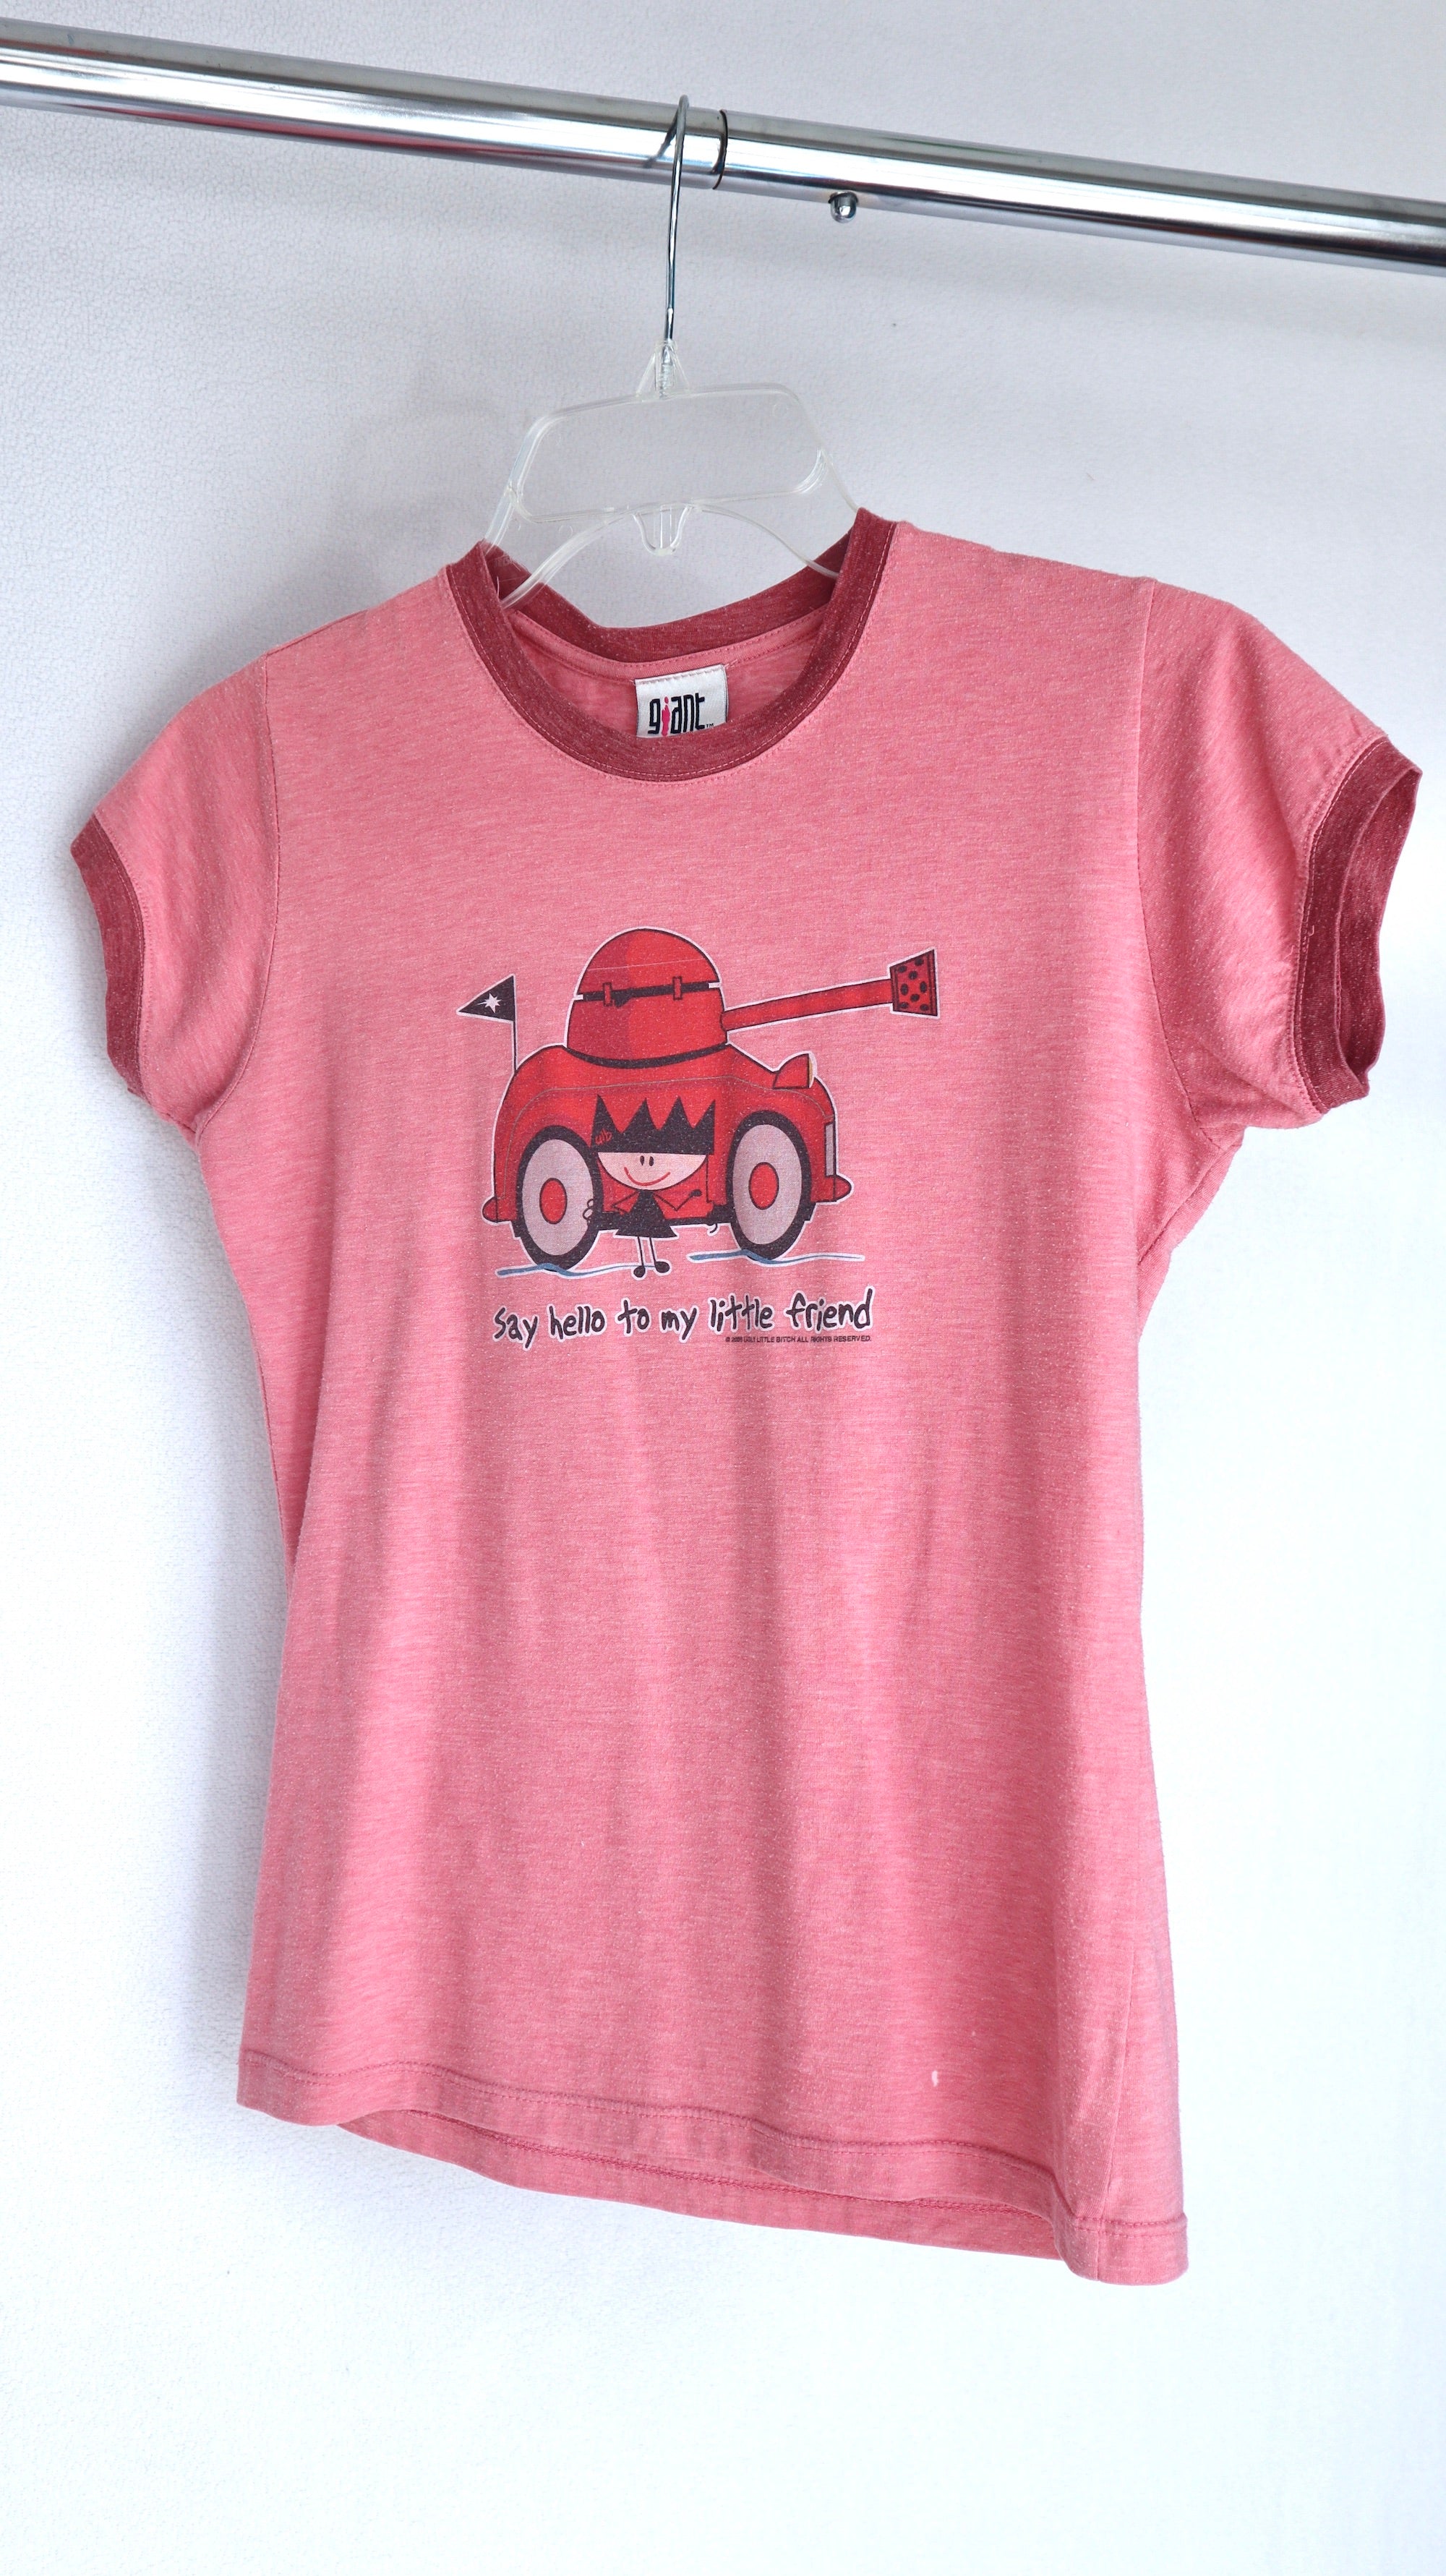 VINTAGE 2005 "SAY HELLO TO MY LITTLE FRIEND" RINGER BABY TEE